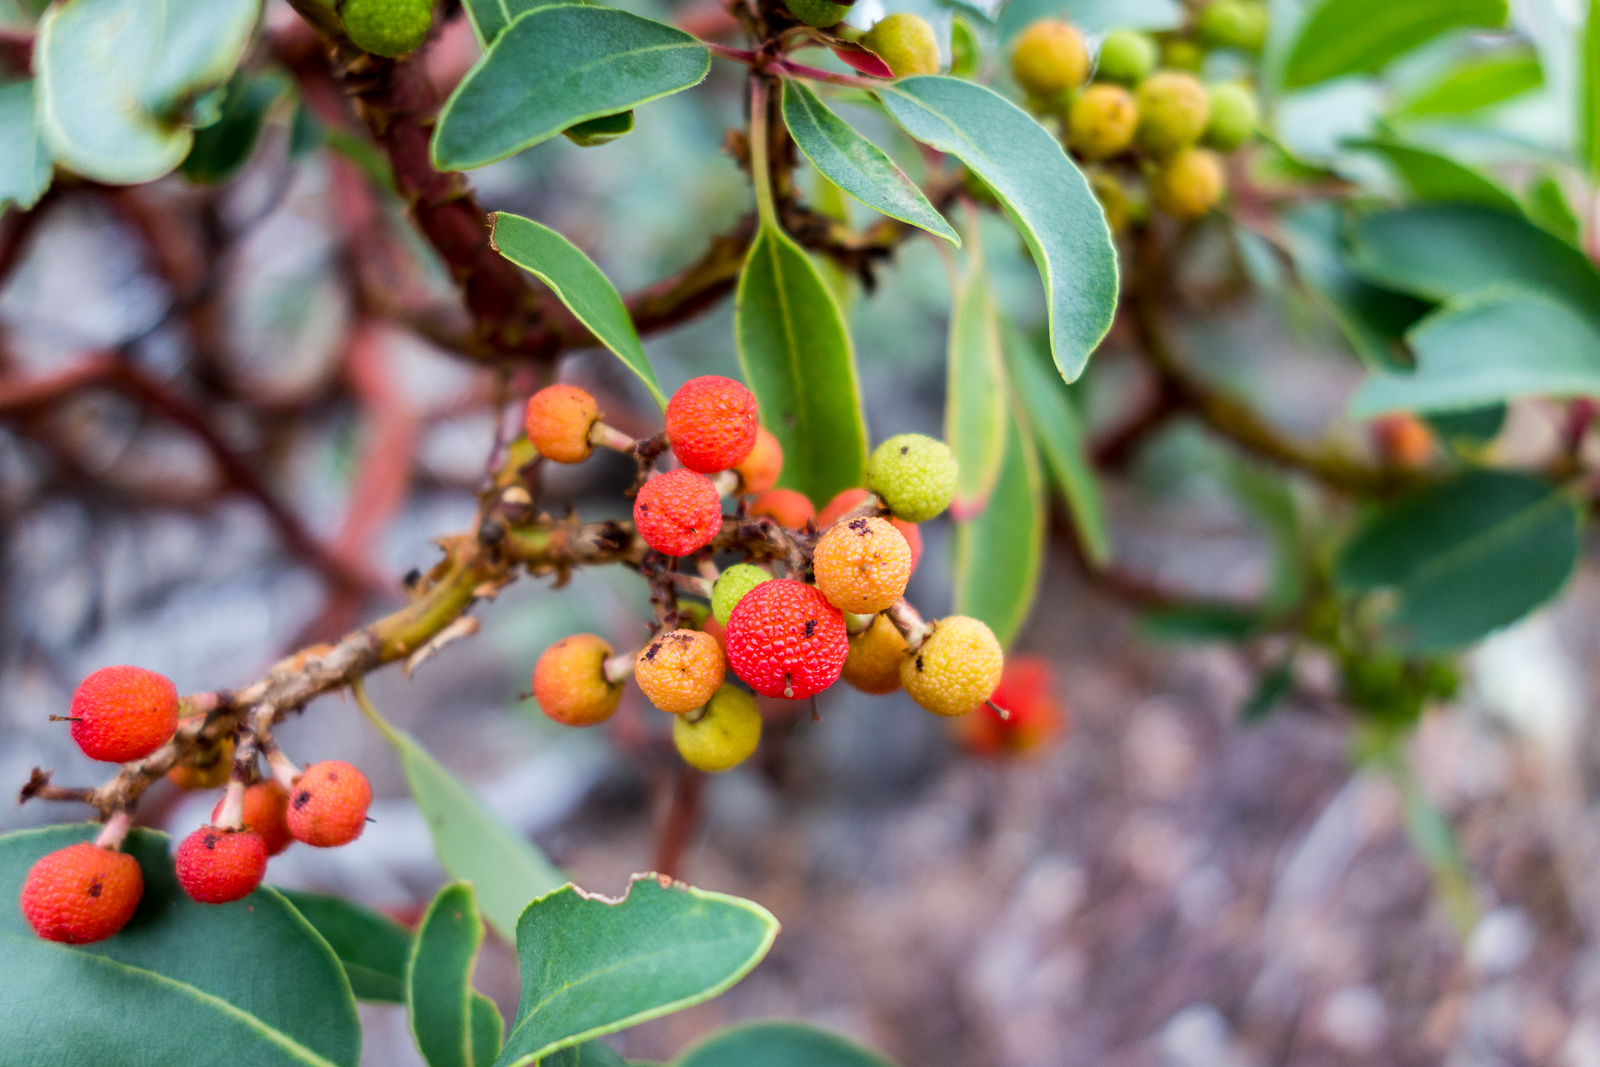 Colorful Madrone berries along the Red Ridge Trail. October 2015.